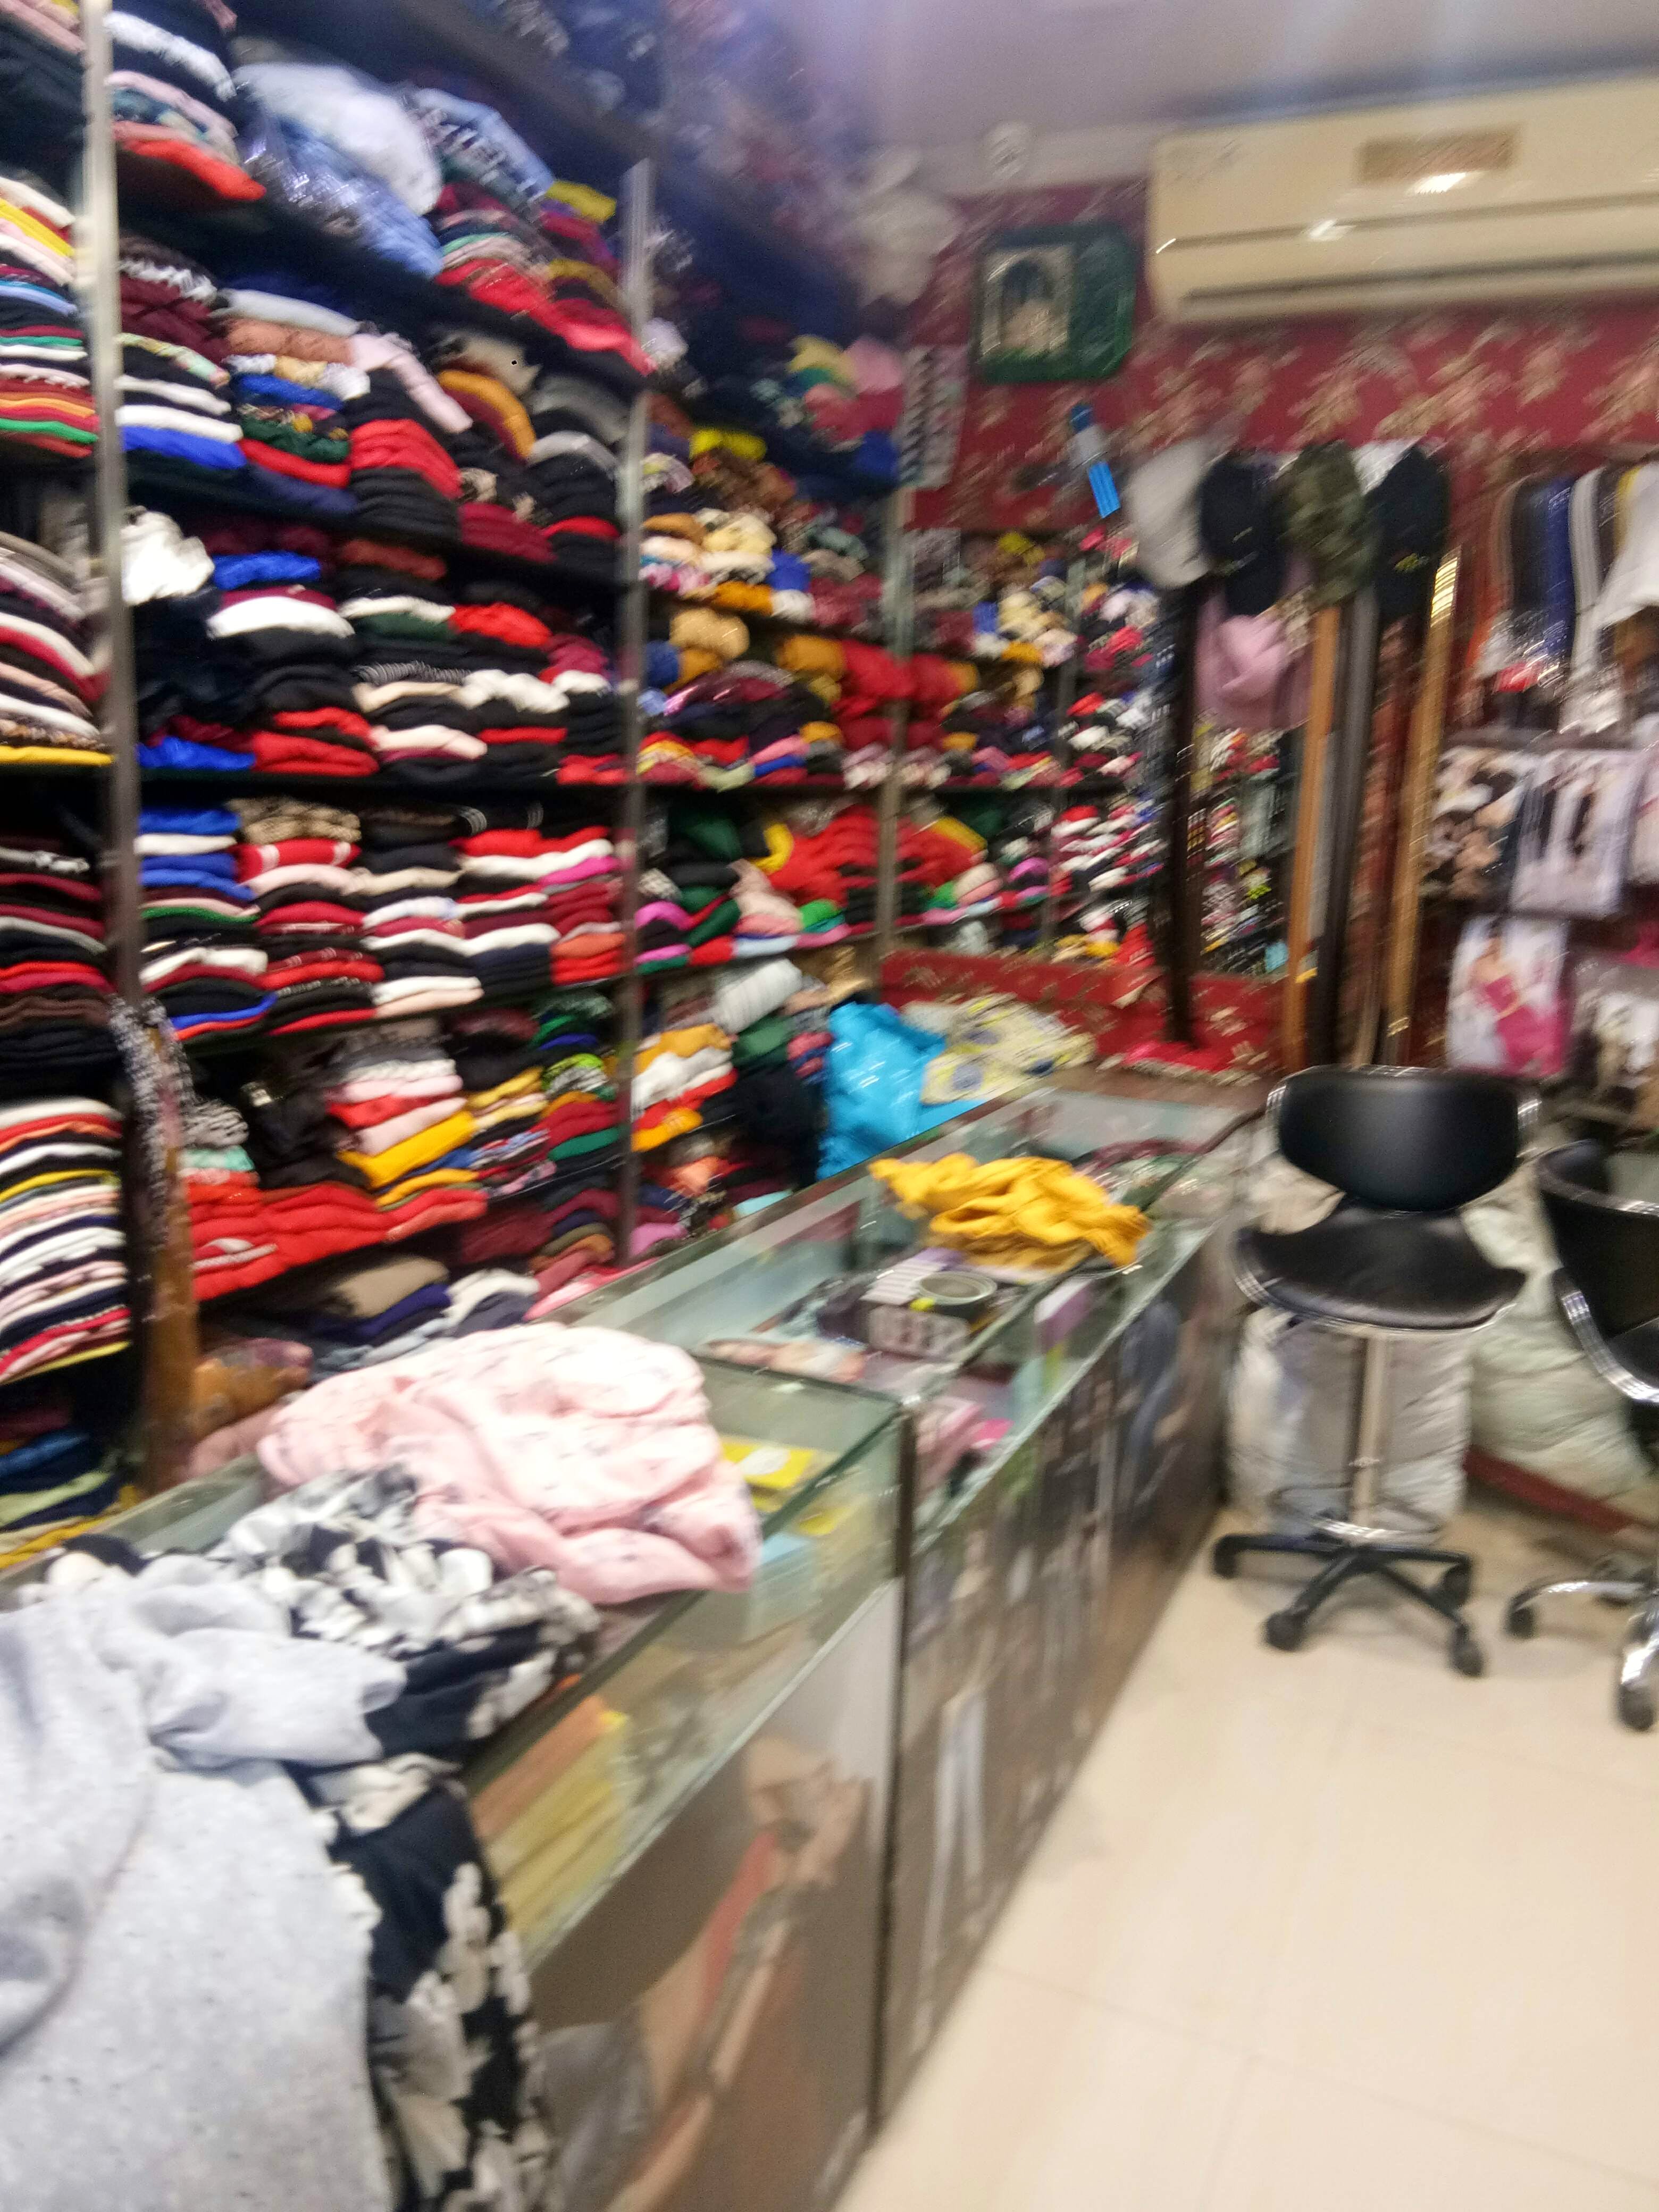 Outlet store,Product,Retail,Shopping,Footwear,Building,Marketplace,Supermarket,Customer,Bazaar